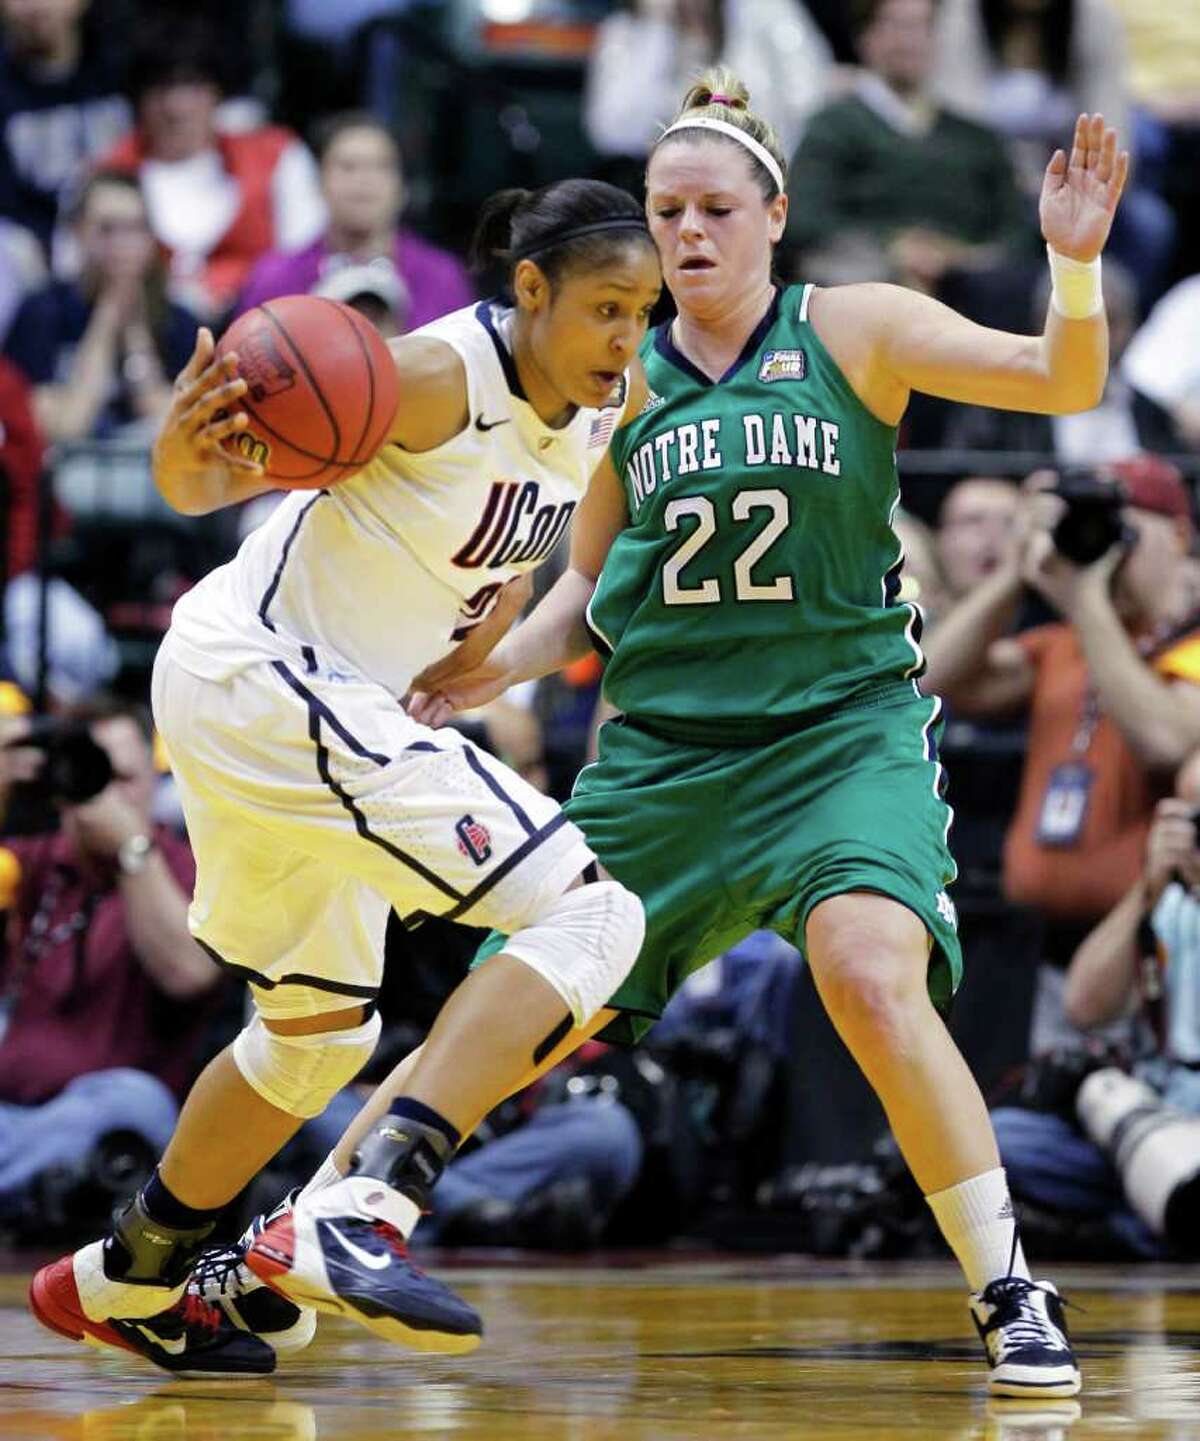 Connecticut's Maya Moore, left, drives on Notre Dame's Brittany Mallory (22) in the first half of a women's NCAA Final Four semifinal college basketball game in Indianapolis, Sunday, April 3, 2011. (AP Photo/Michael Conroy)